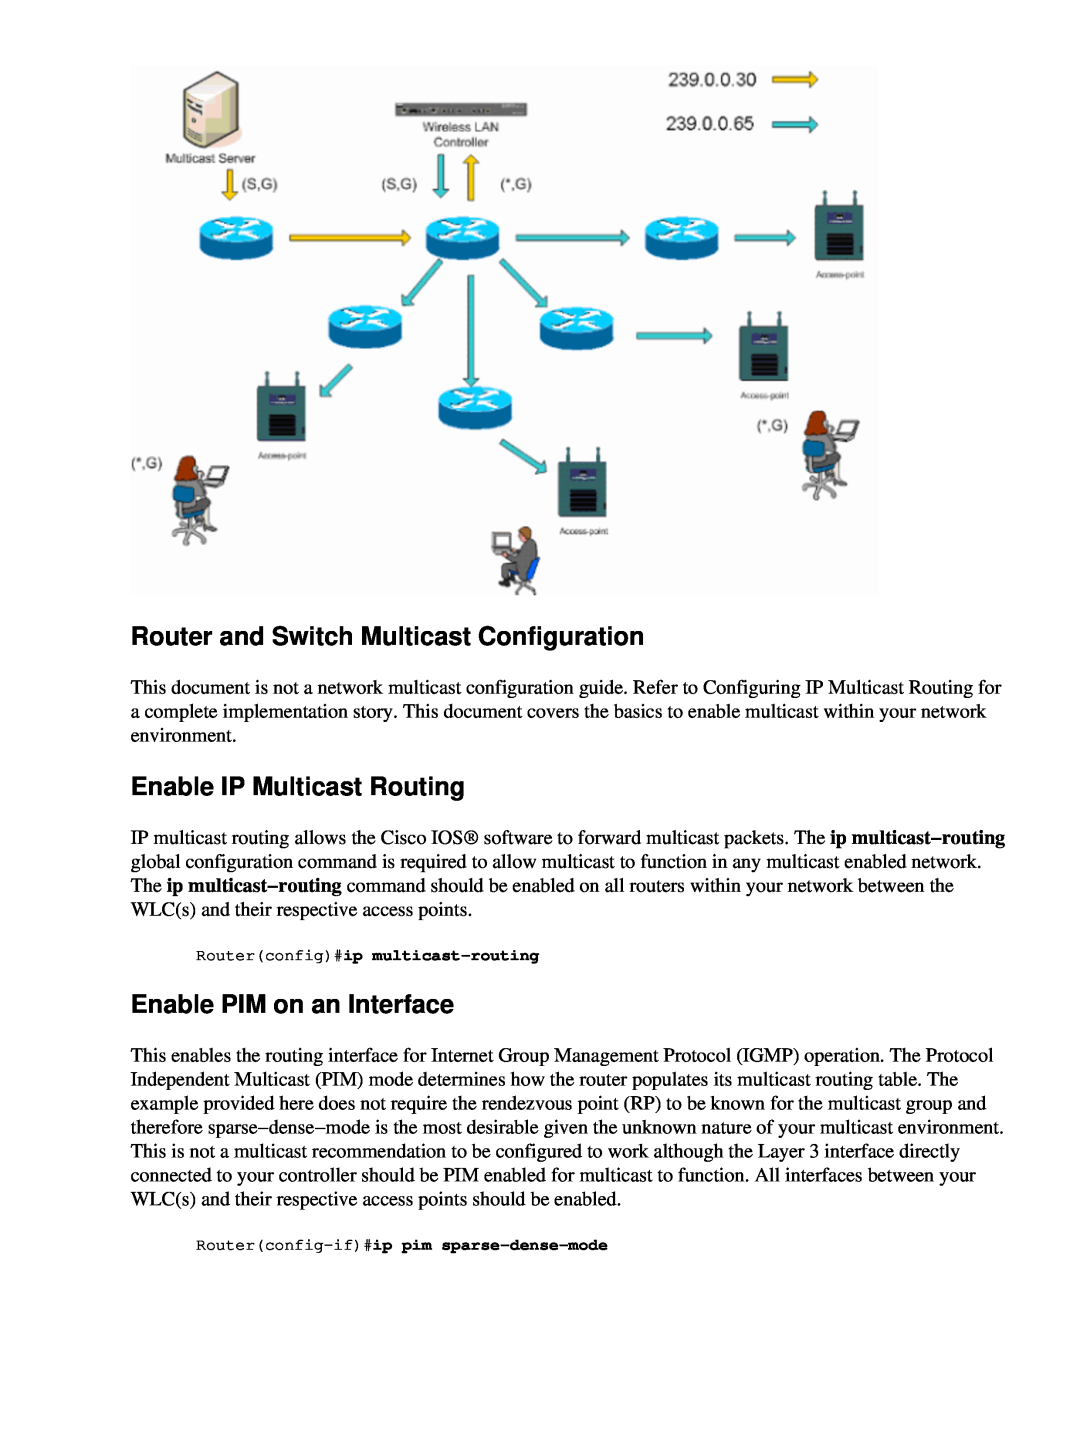 Cisco Systems 71642 Router and Switch Multicast Configuration, Enable IP Multicast Routing, Enable PIM on an Interface 